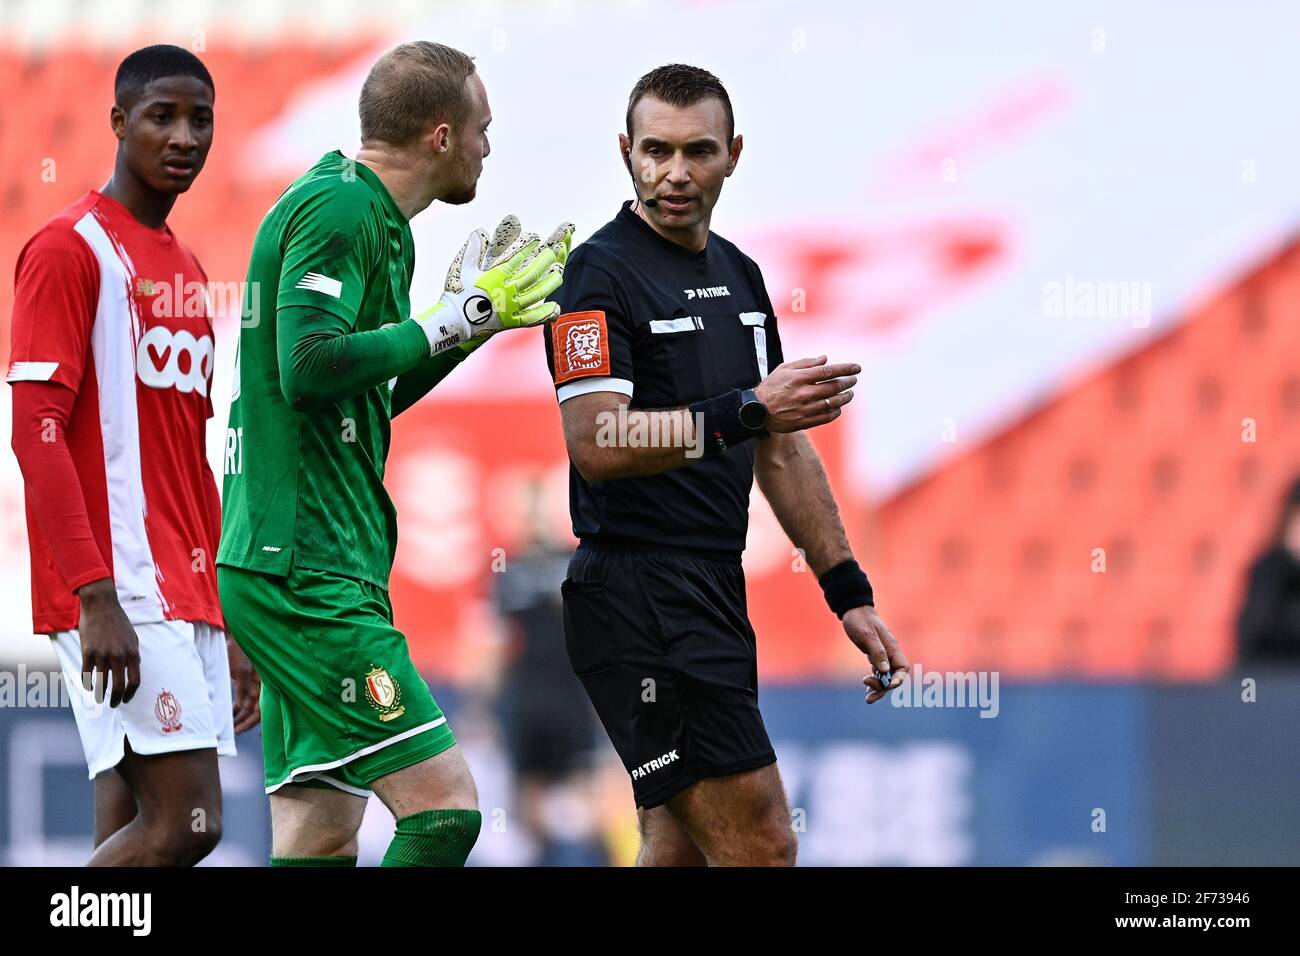 Standard's goalkeeper Arnaud Bodart and referee Nicolas Laforge pictured during a soccer match between Standard Liege and KAA Gent, Sunday 04 April 20 Stock Photo